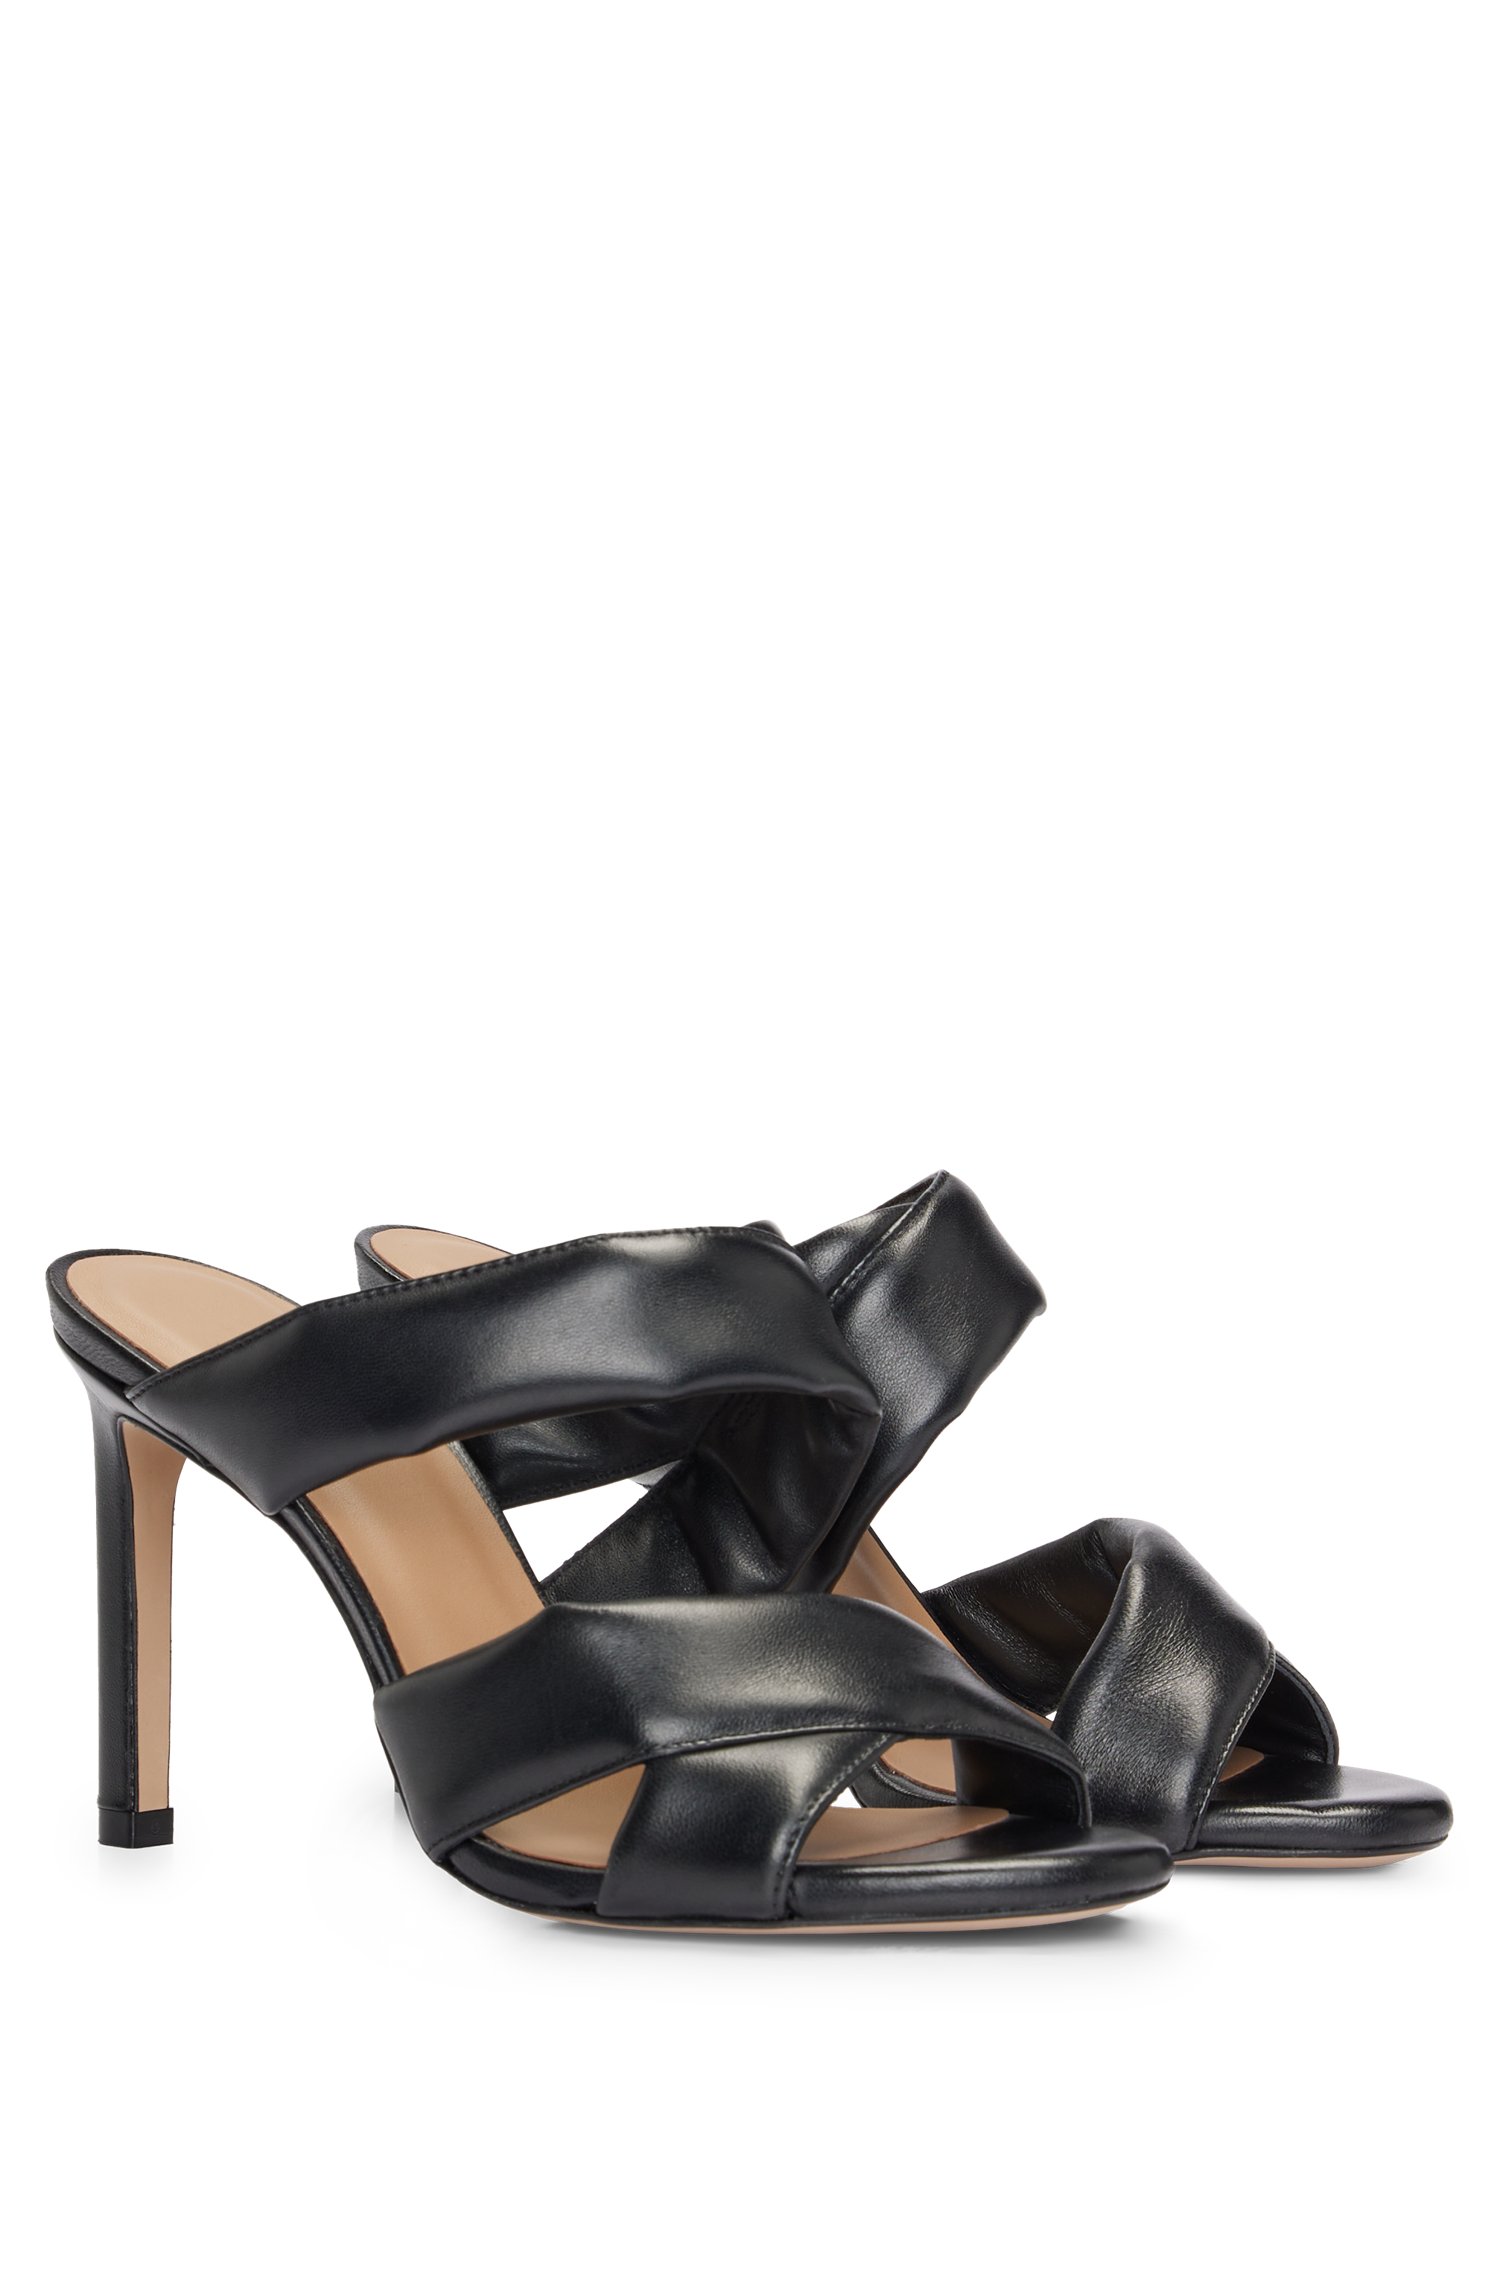 Open-toe mules nappa leather with padded straps